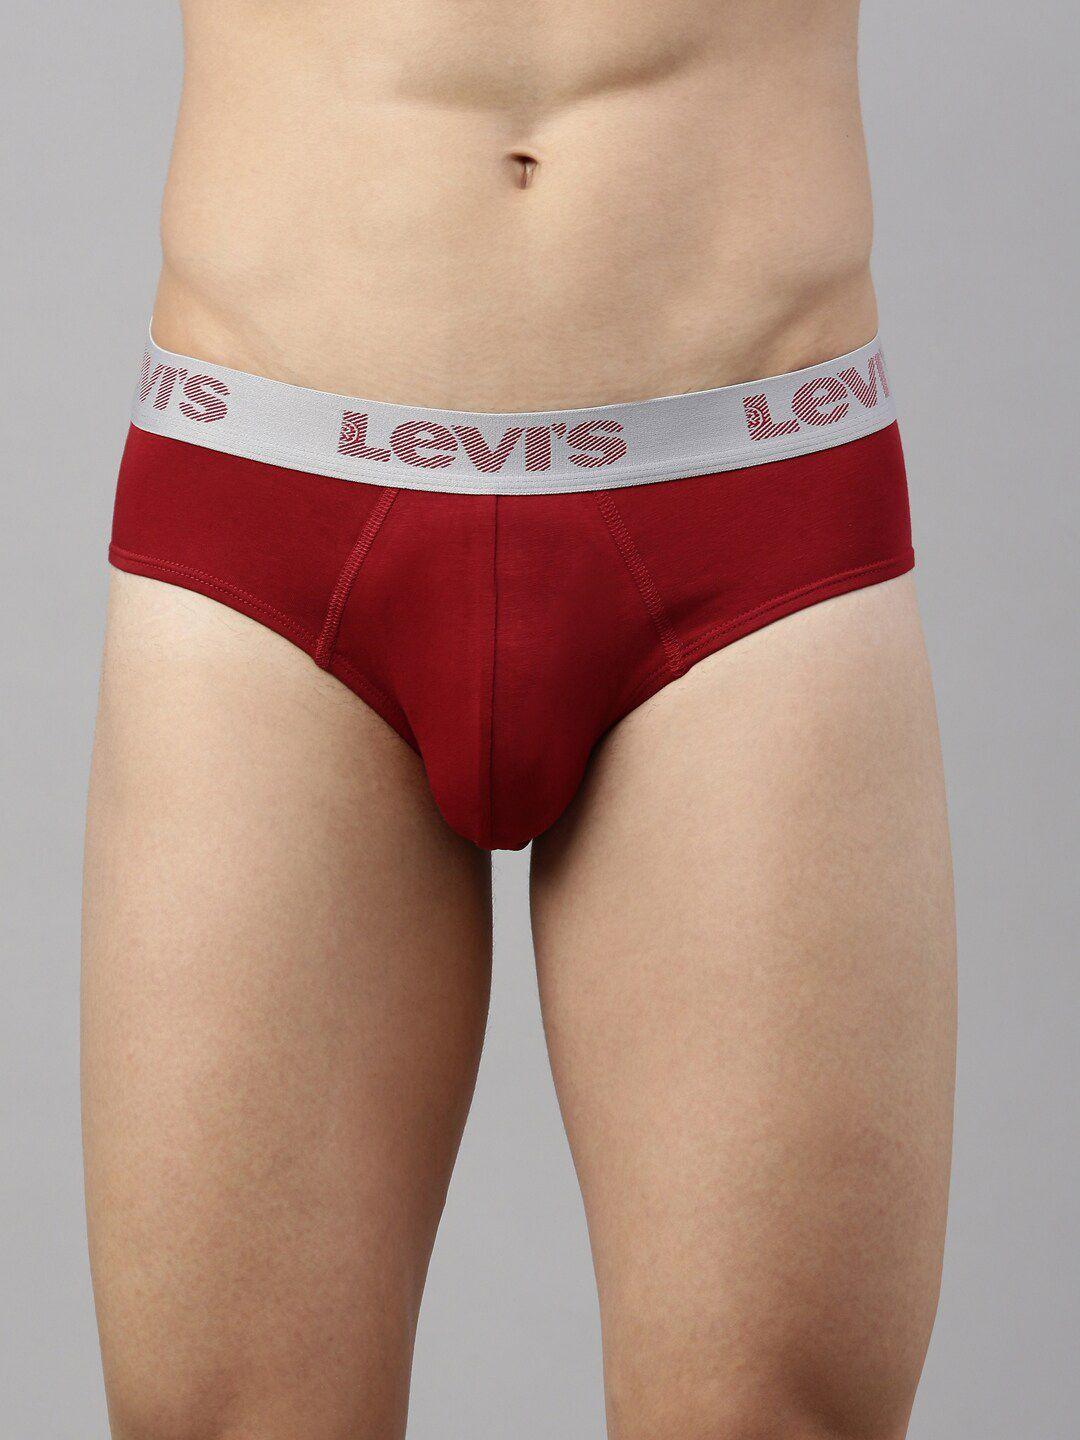 levis men smartskin technology cotton active briefs with tag free comfort #066